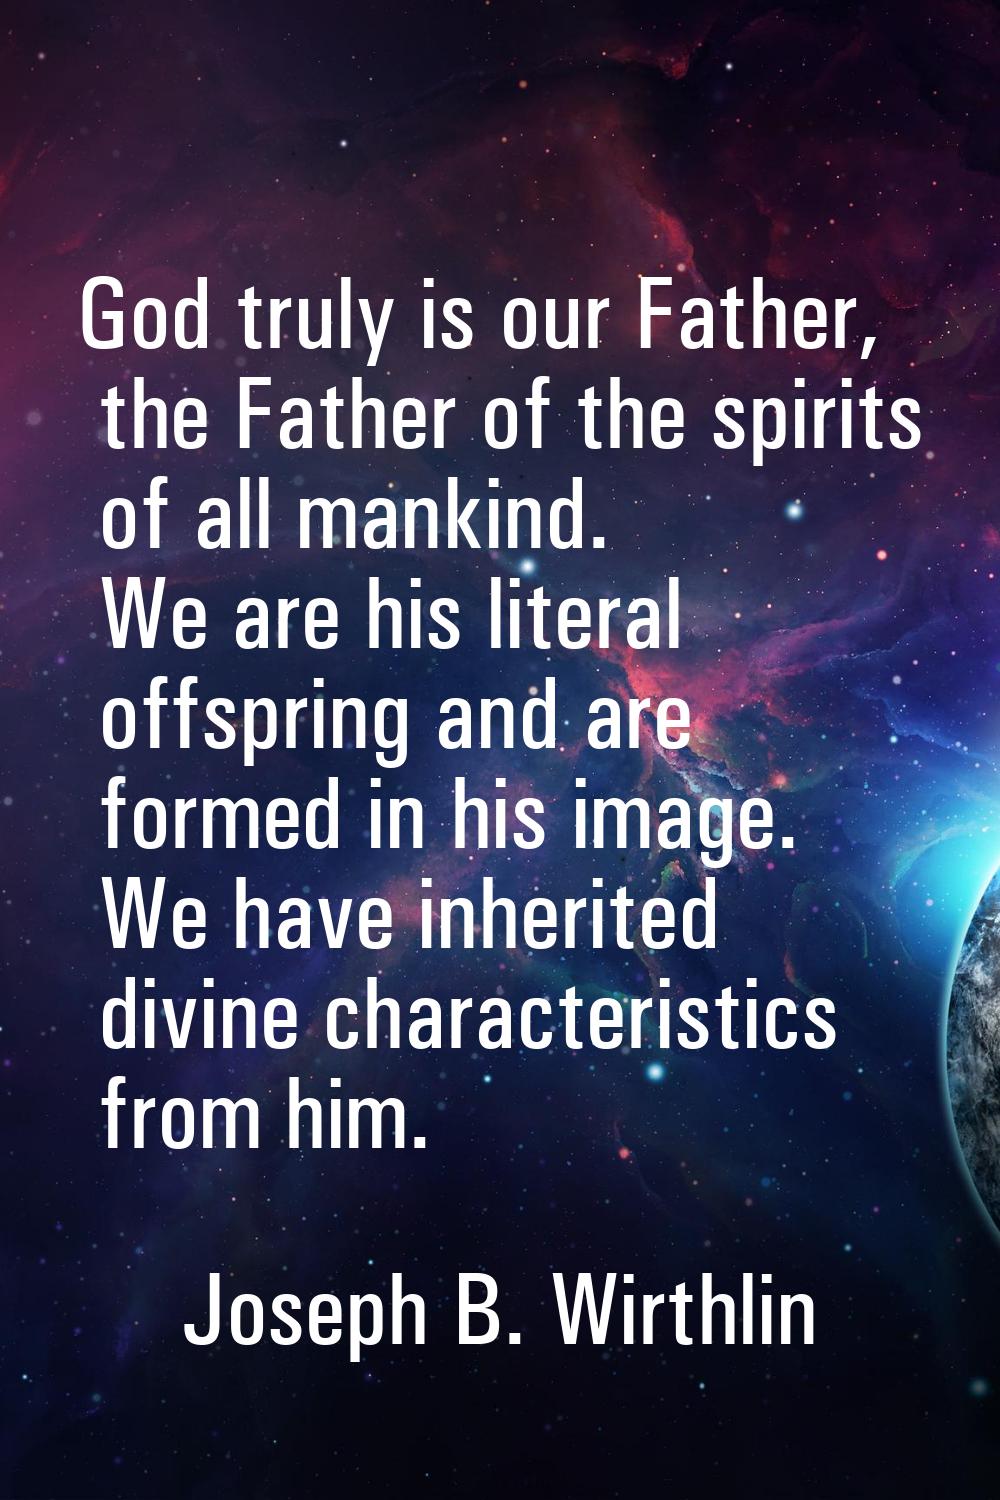 God truly is our Father, the Father of the spirits of all mankind. We are his literal offspring and